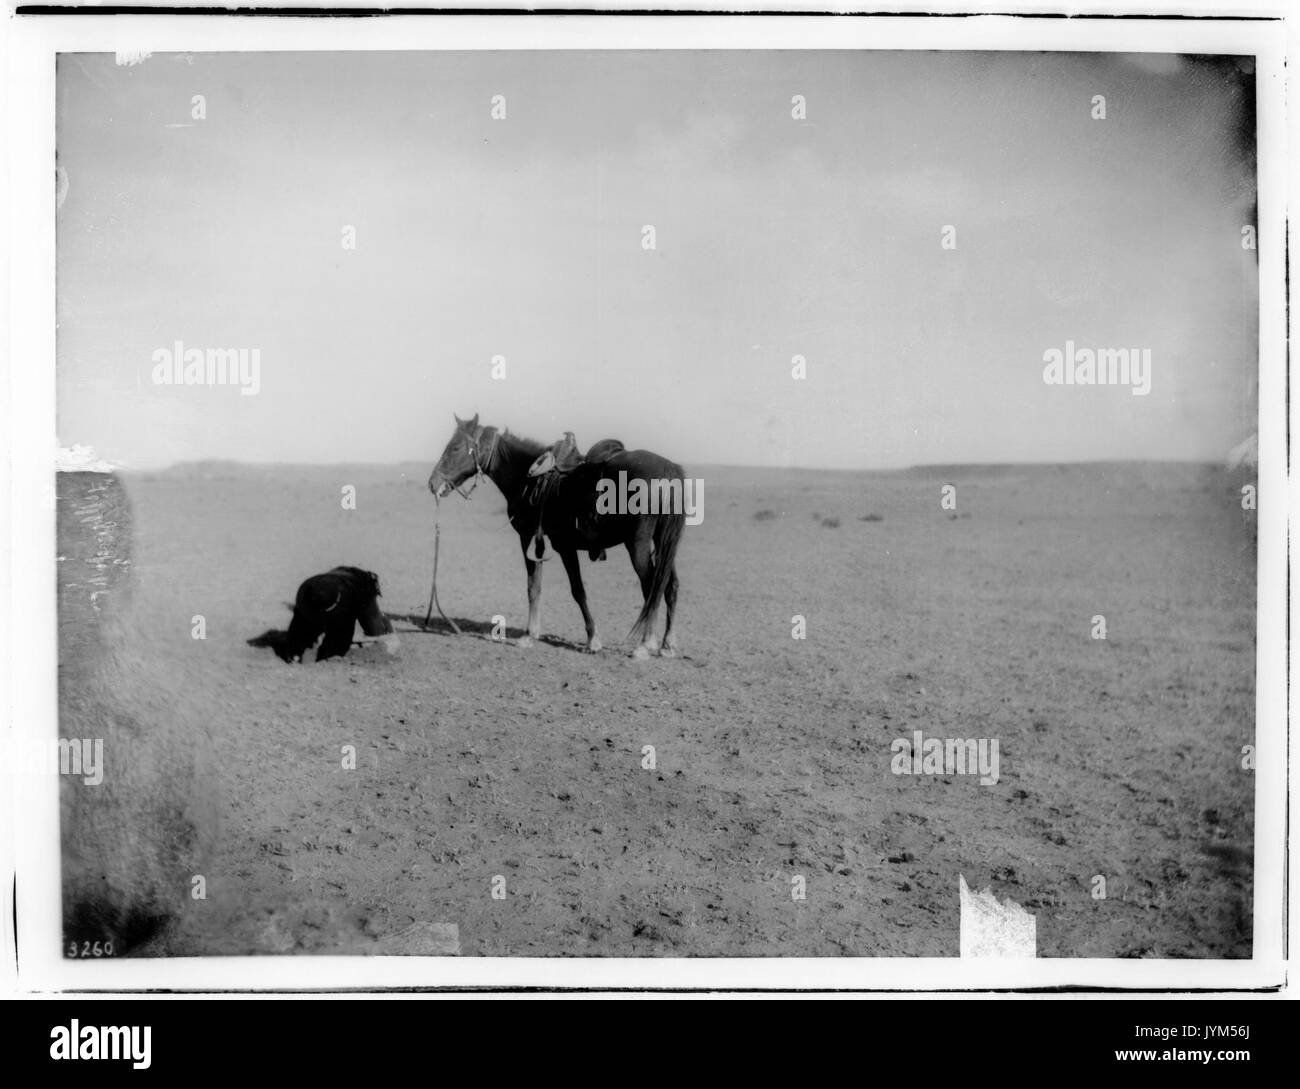 A Navajo Indian man staking his horse to a hole in the desert sand so the horse does not wander off, ca.1900 (CHS 3260) Stock Photo